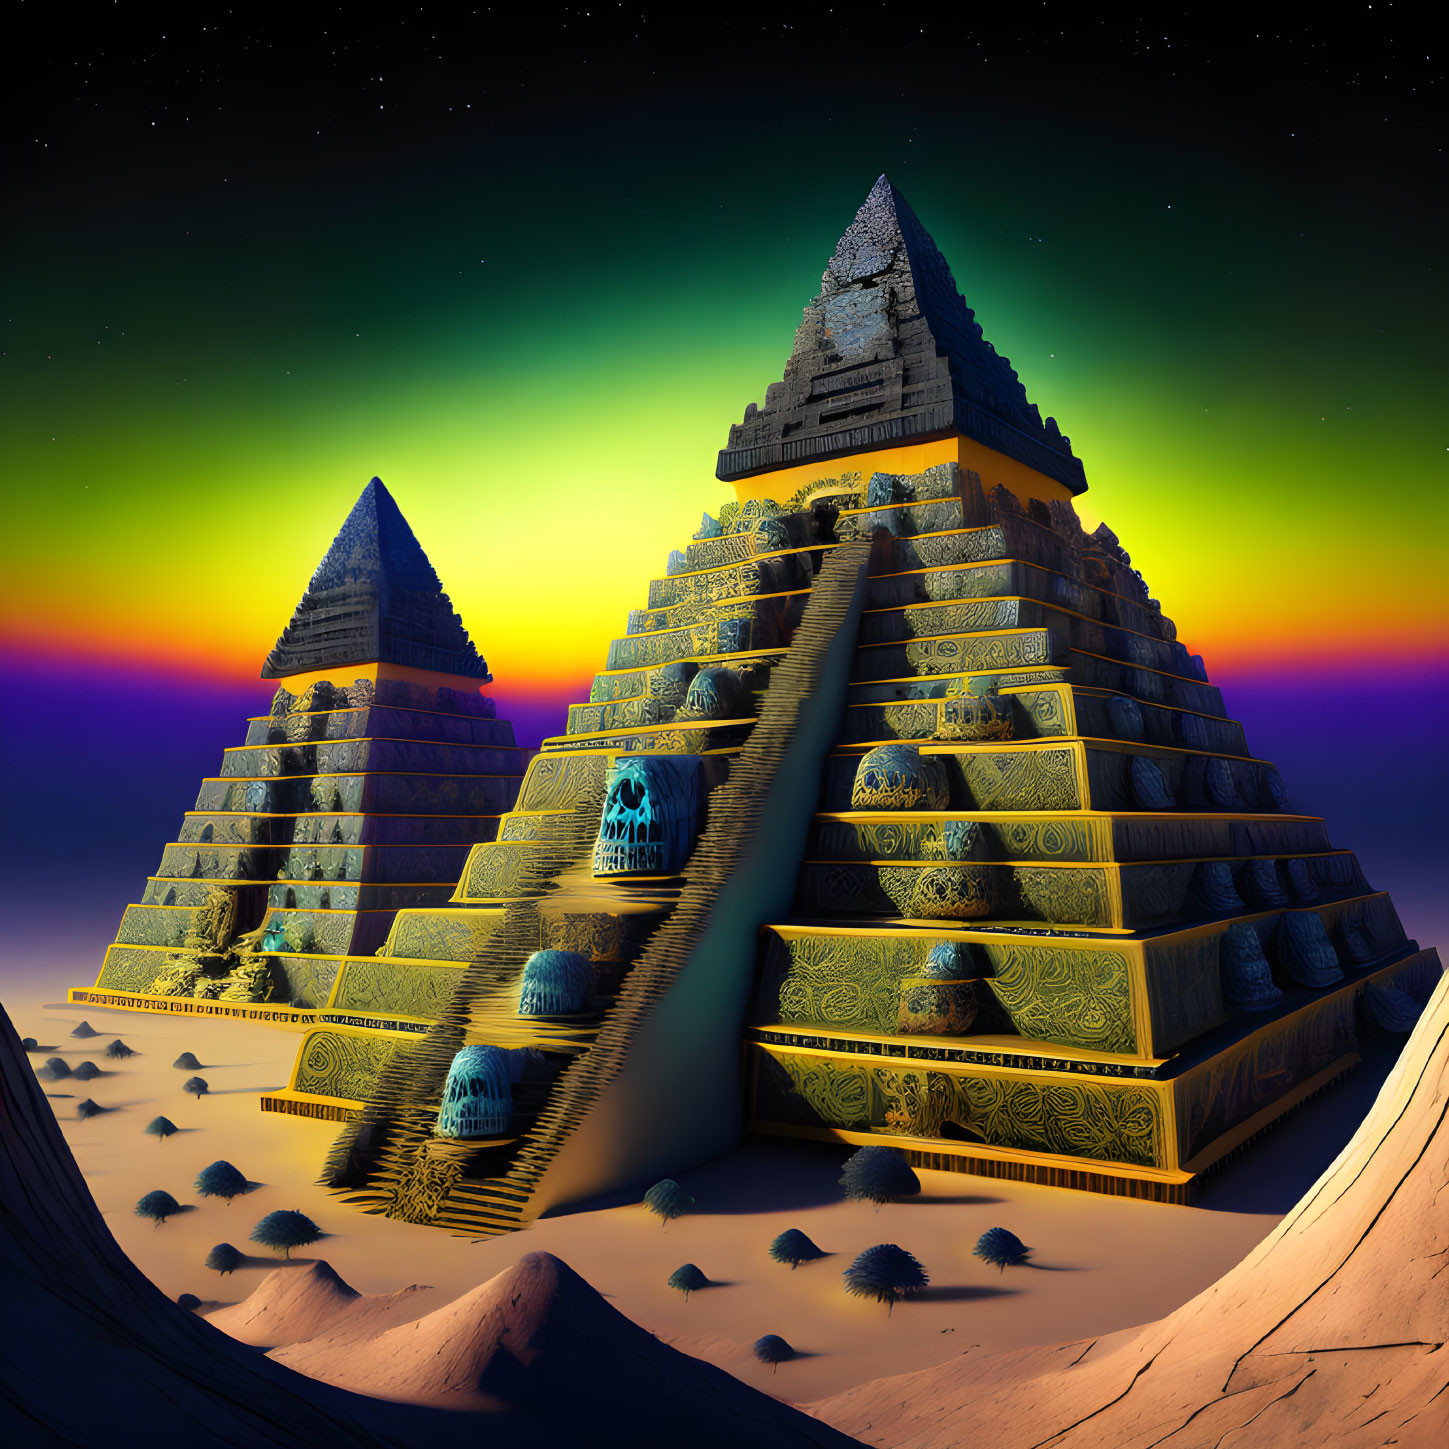 The Psychedelic Pyramids of Mescalito's World